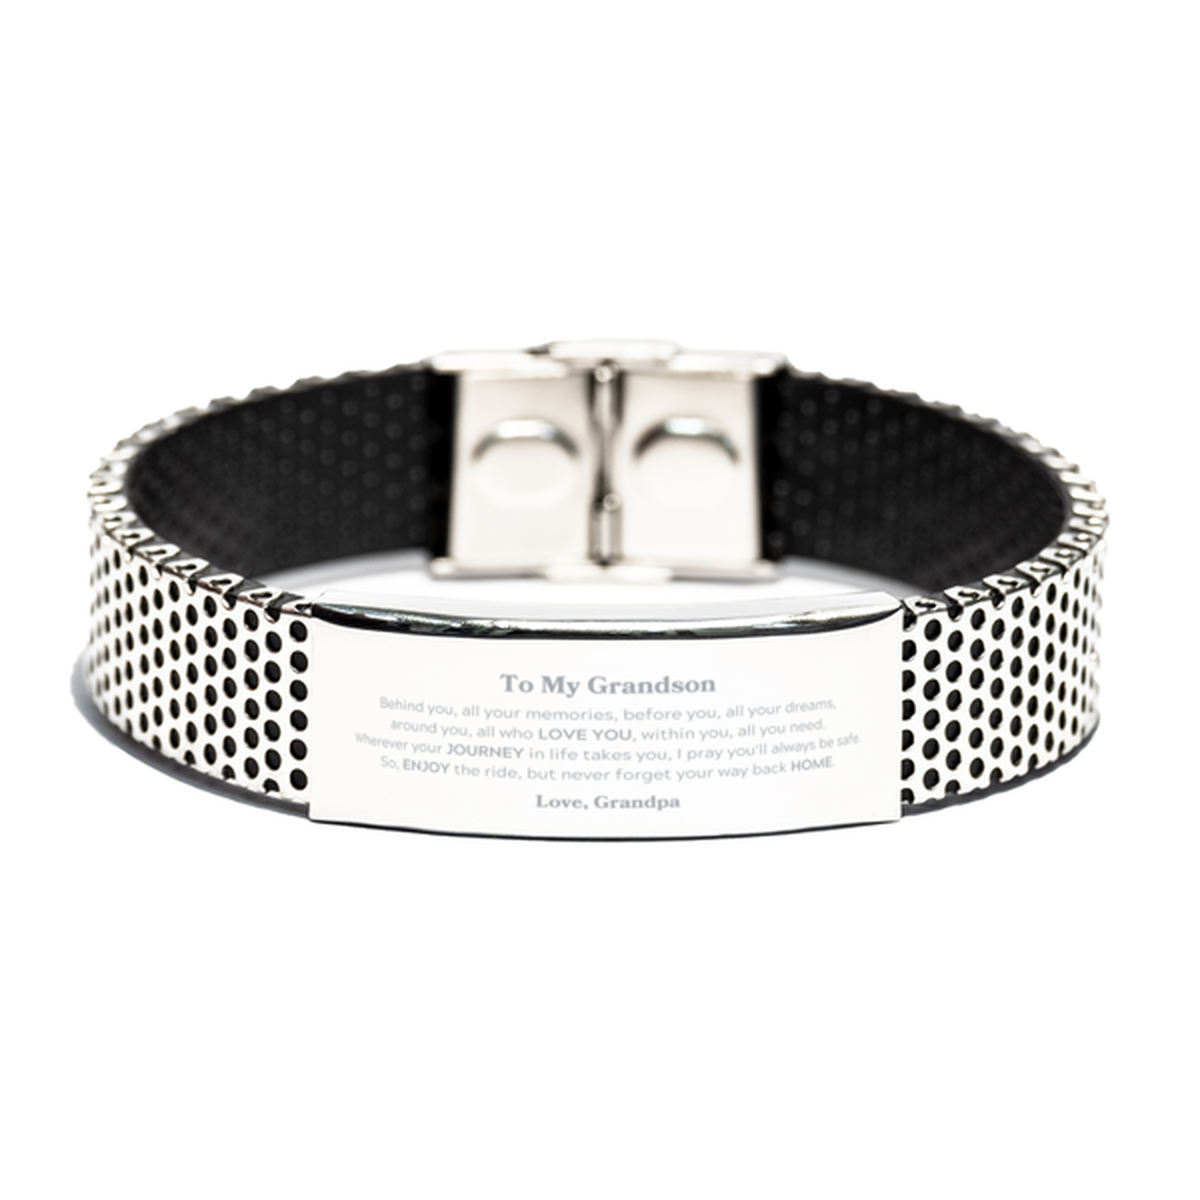 To My Grandson Graduation Gifts from Grandpa, Grandson Stainless Steel Bracelet Christmas Birthday Gifts for Grandson Behind you, all your memories, before you, all your dreams. Love, Grandpa